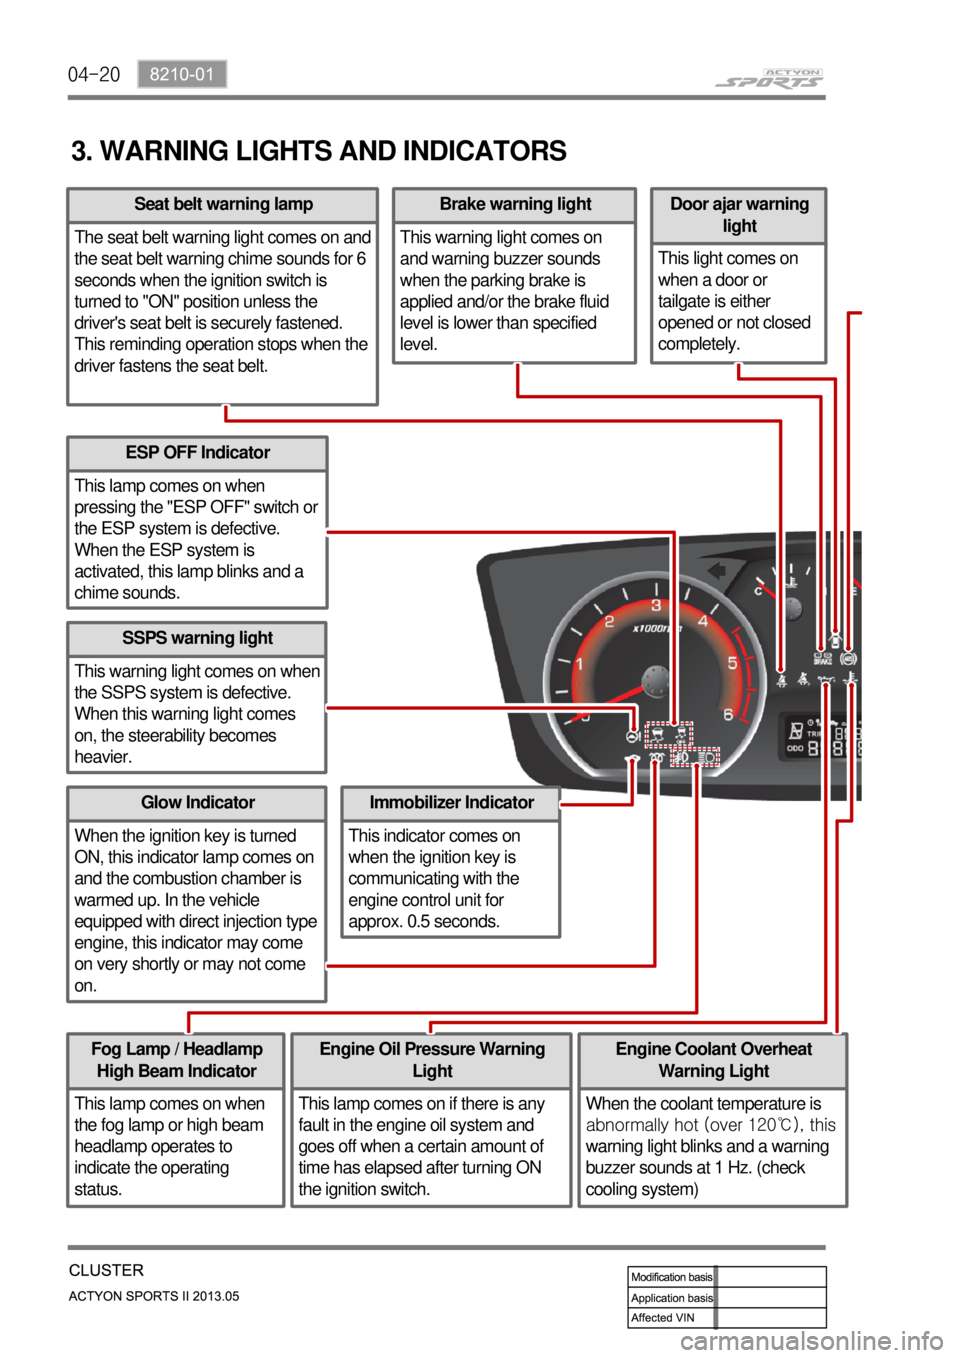 SSANGYONG NEW ACTYON SPORTS 2013 User Guide 04-20
3. WARNING LIGHTS AND INDICATORS
ESP OFF Indicator
This lamp comes on when 
pressing the "ESP OFF" switch or 
the ESP system is defective. 
When the ESP system is 
activated, this lamp blinks an